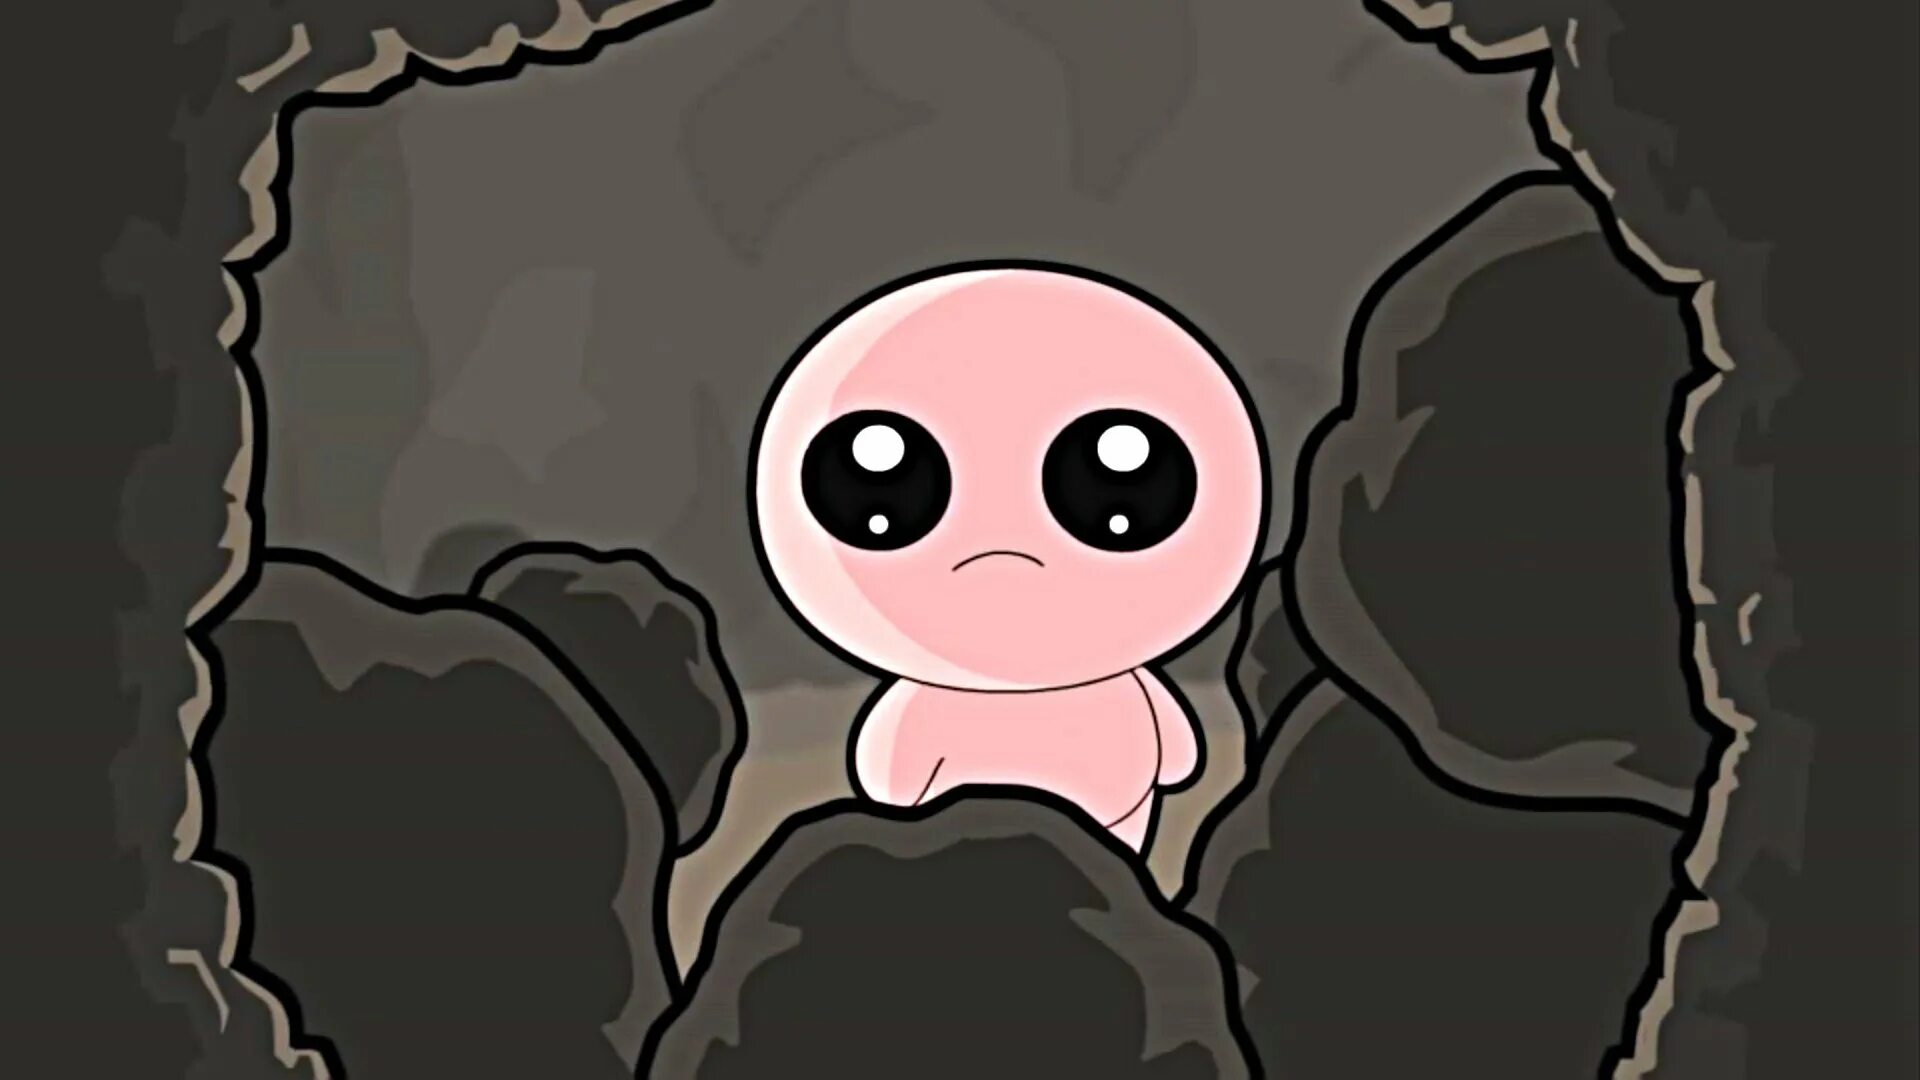 Isaac challenges. The Binding of Isaac. The Binding of Isaac Repentance. Айзек биндинг.